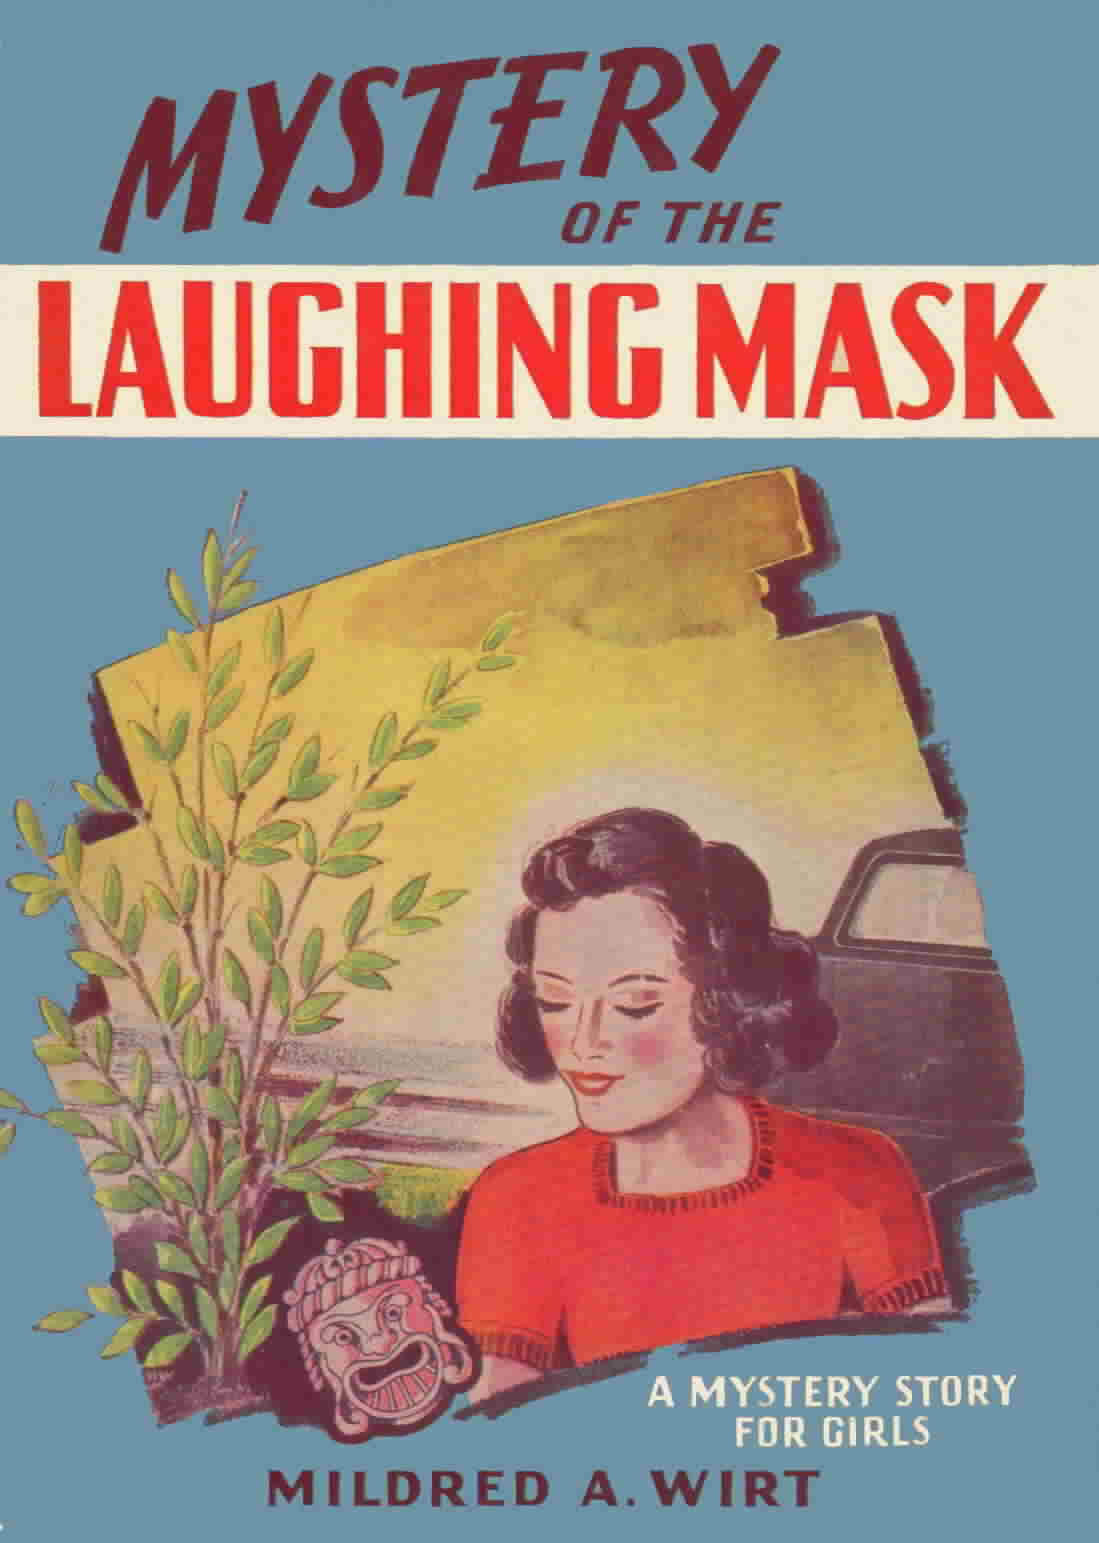 'Mystery of the Laughing Mask' by Mildred A. Wirt